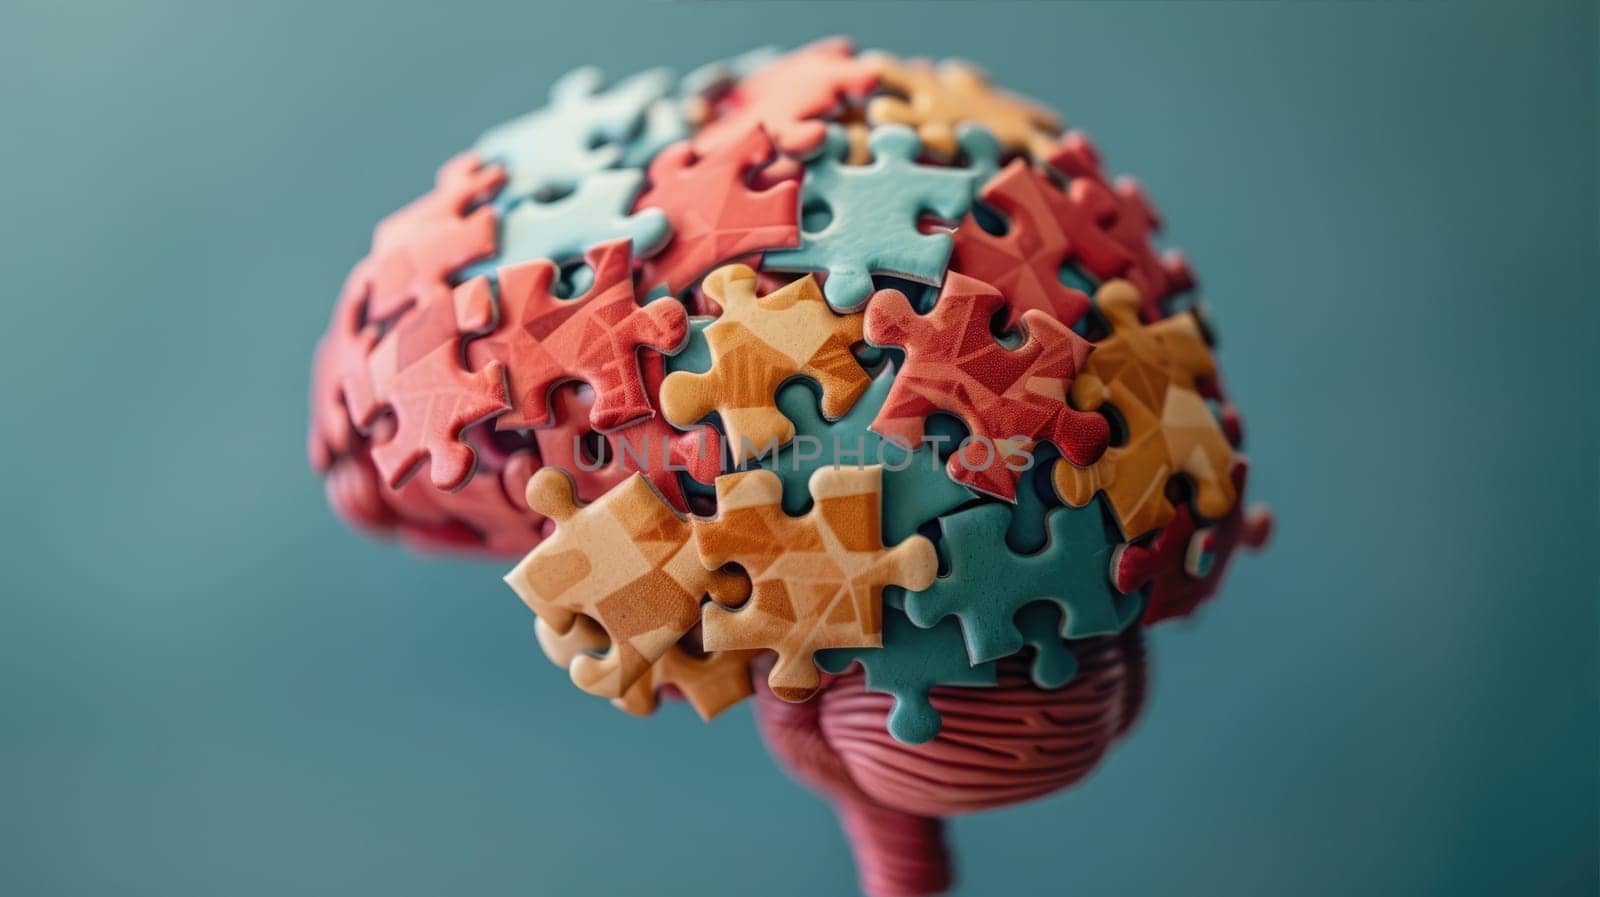 A brain model made of puzzle pieces AI